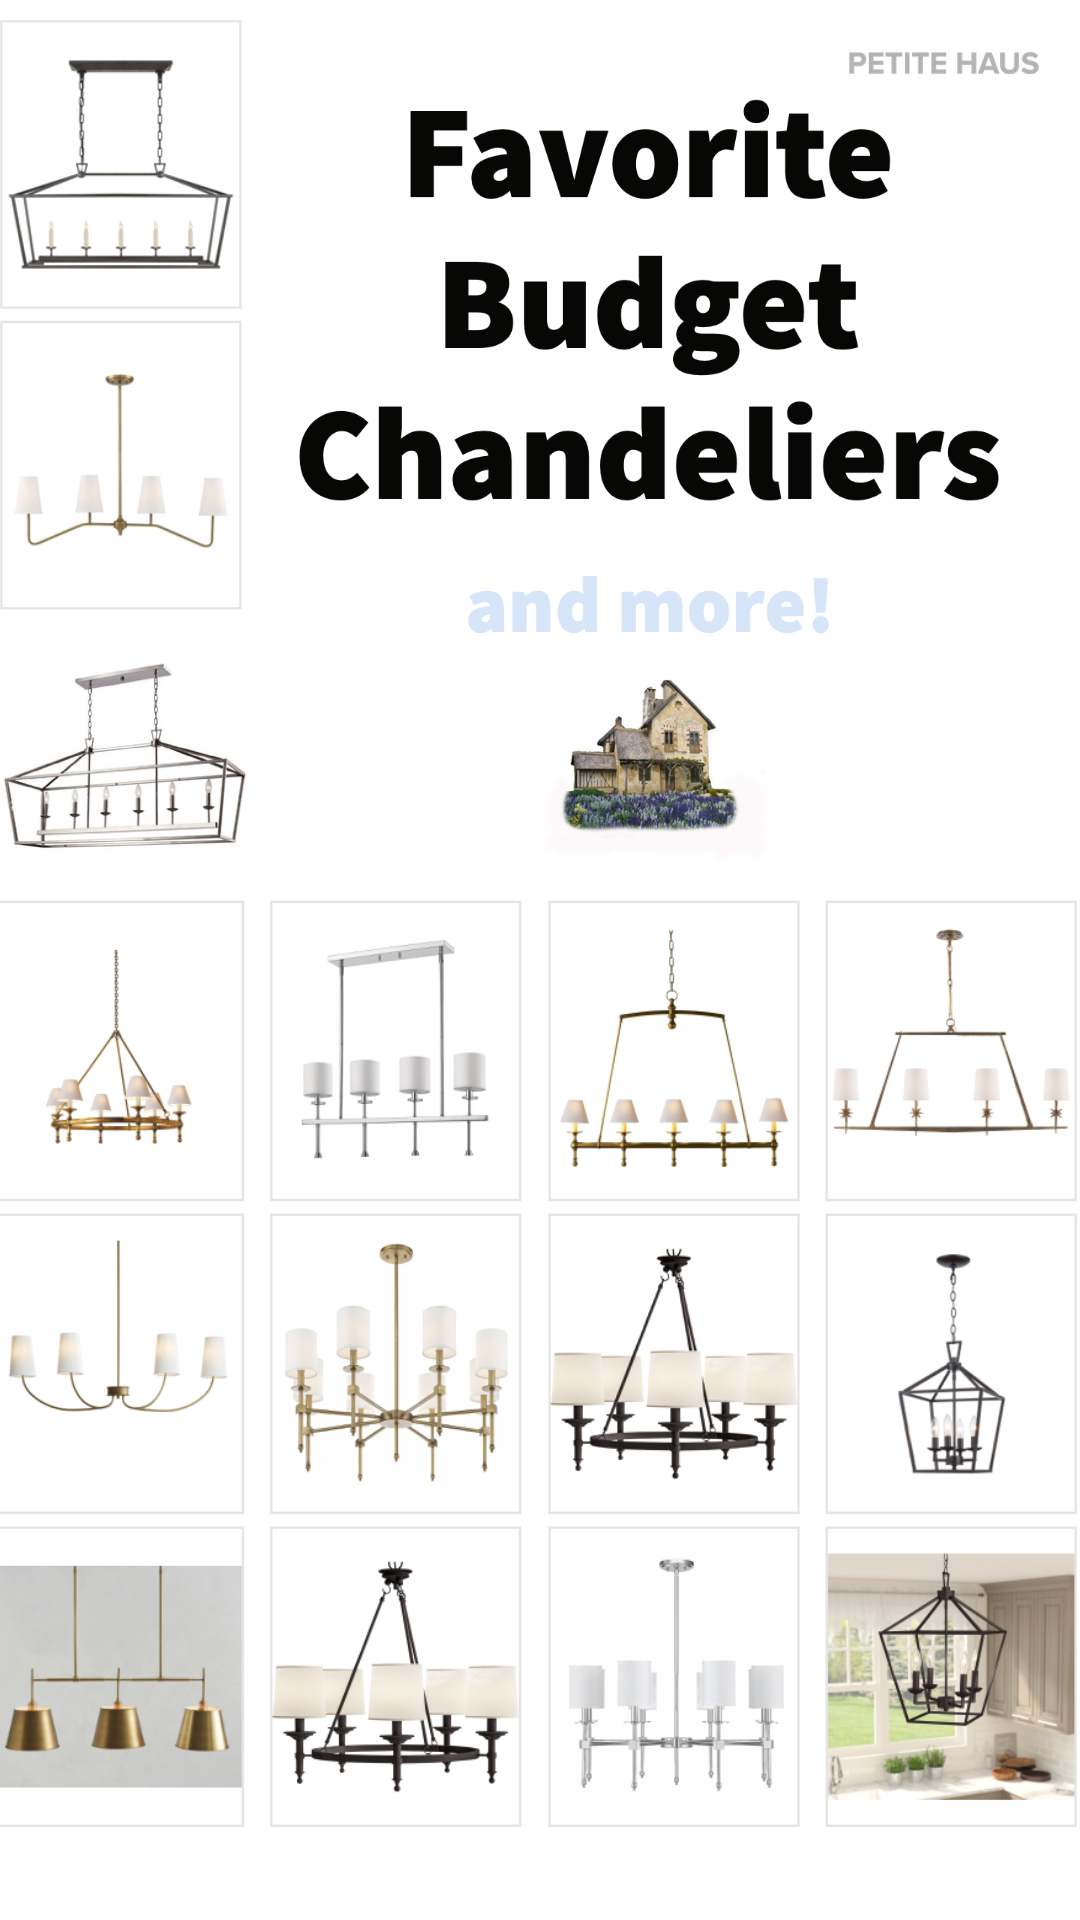 Budget lighting chandeliers modern farmhouse transitional style - copycat and dupes also found for E.F. Chapman, Visual Comfort, Darlana.